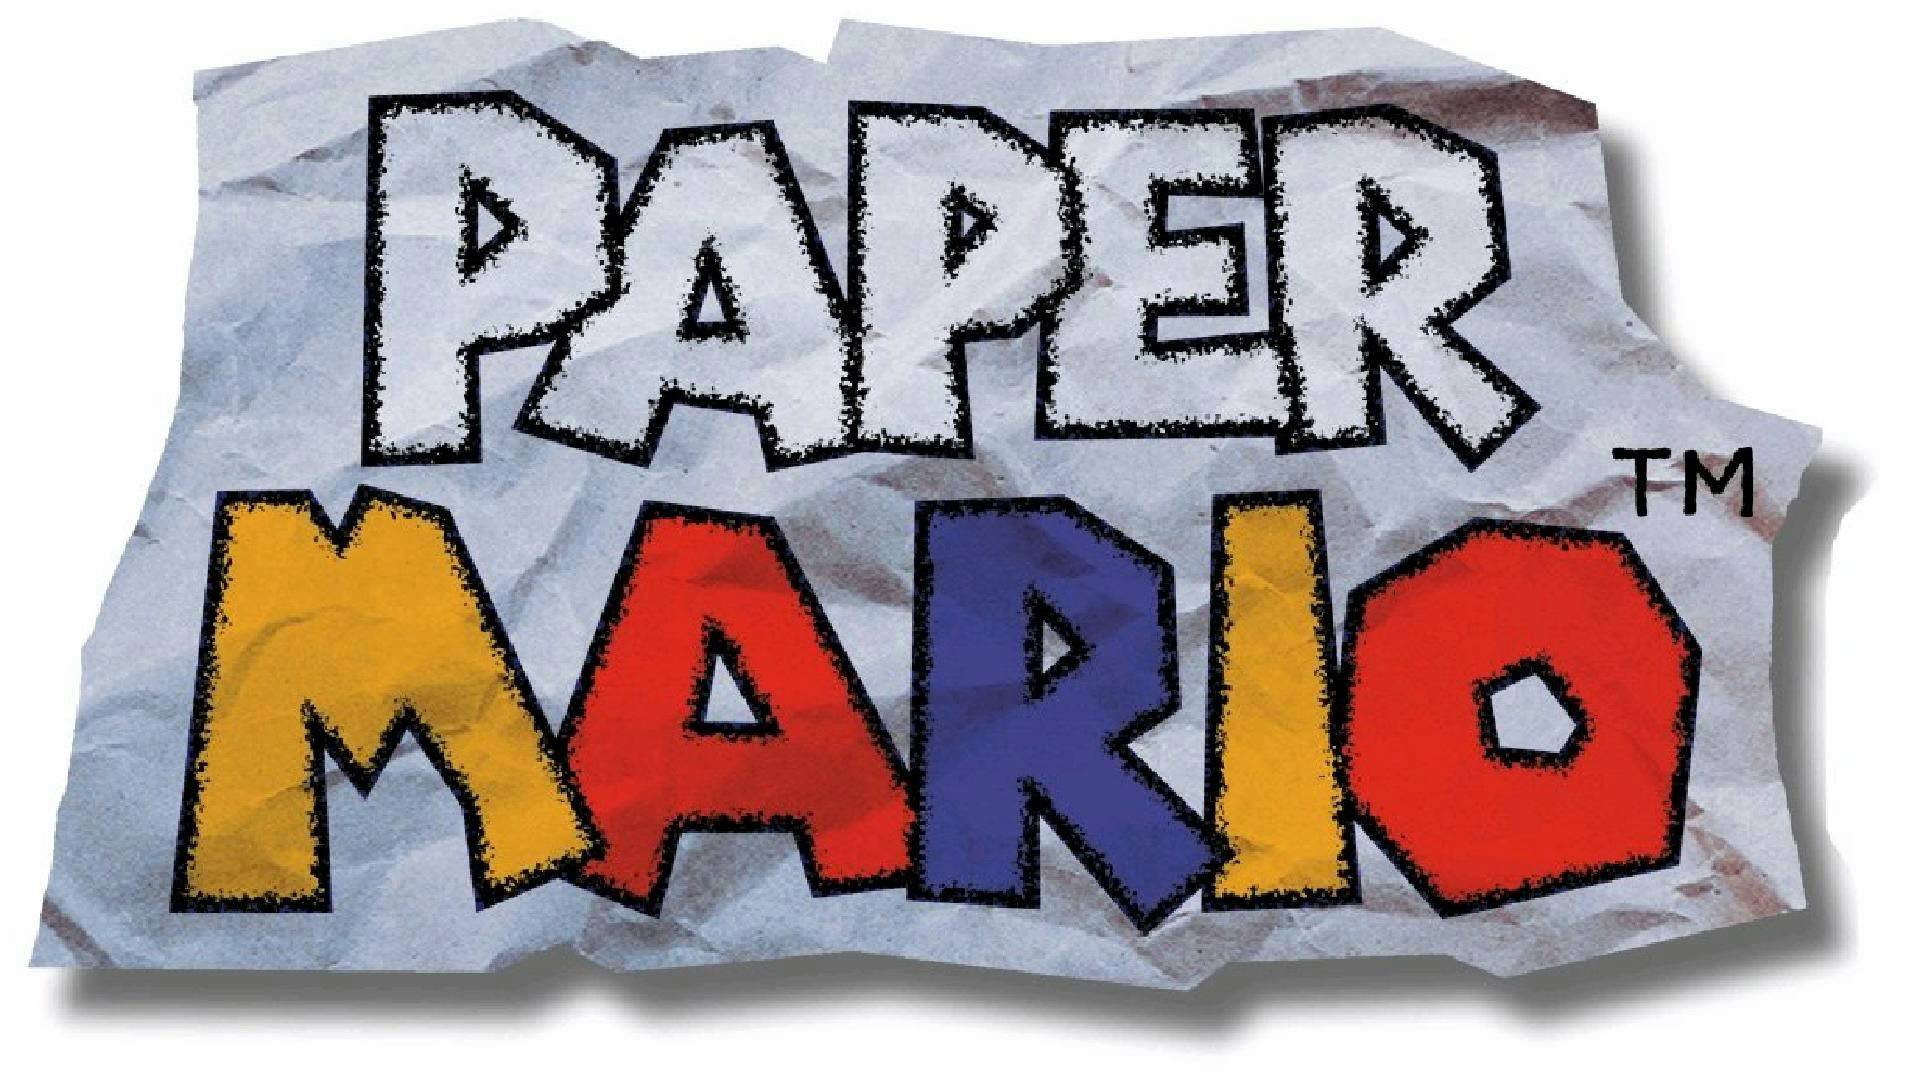 paper mario n64 for sale